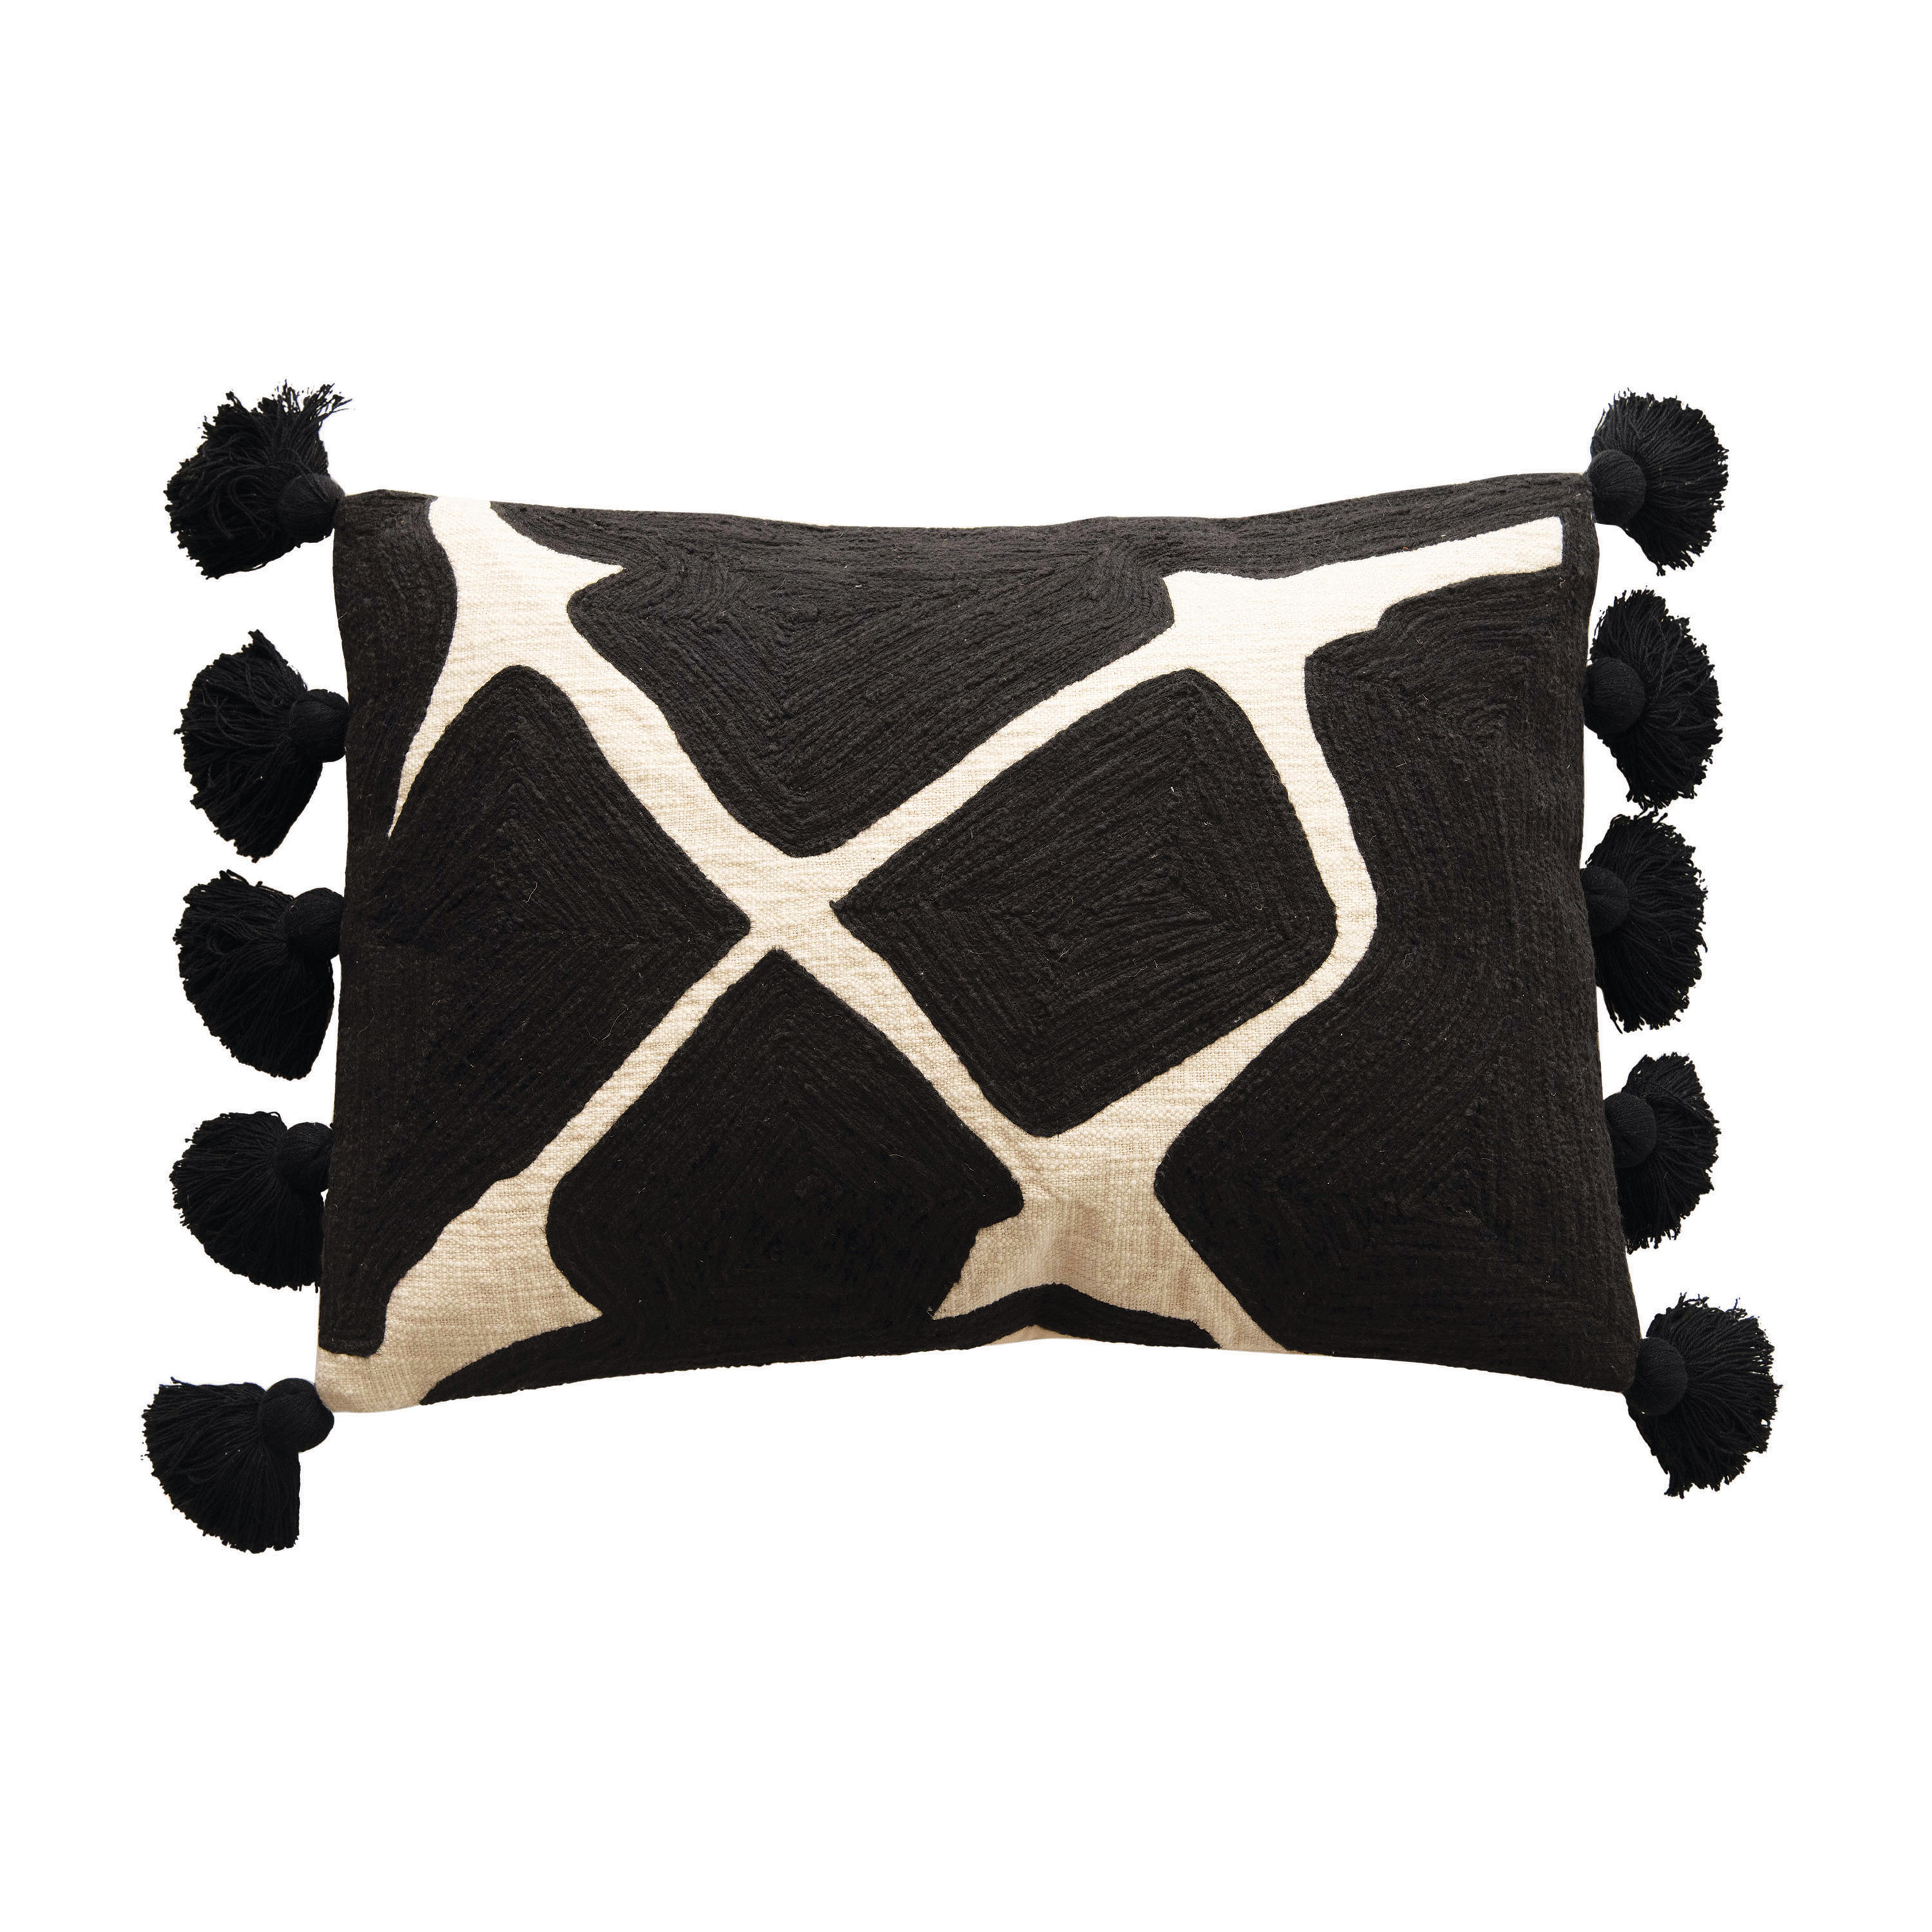 Cotton Embroidered Lumbar Pillow, Black & White - Nomad Home